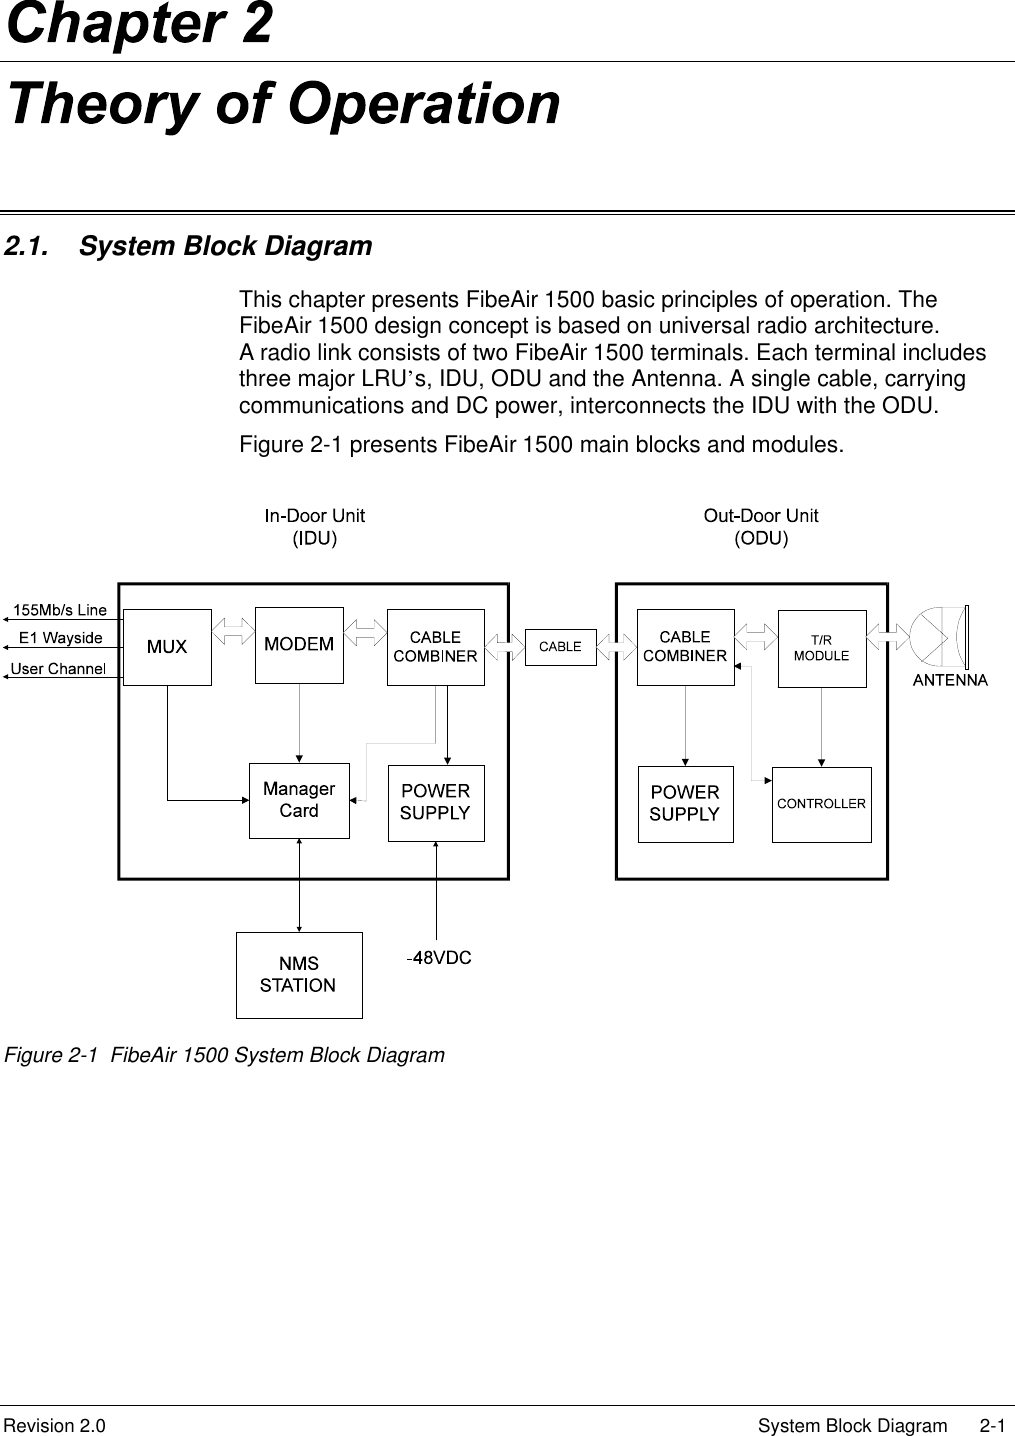 Revision 2.0   System Block Diagram 2-12.1. System Block DiagramThis chapter presents FibeAir 1500 basic principles of operation. TheFibeAir 1500 design concept is based on universal radio architecture.A radio link consists of two FibeAir 1500 terminals. Each terminal includesthree major LRU’s, IDU, ODU and the Antenna. A single cable, carryingcommunications and DC power, interconnects the IDU with the ODU.Figure 2-1 presents FibeAir 1500 main blocks and modules.Figure 2-1  FibeAir 1500 System Block Diagram